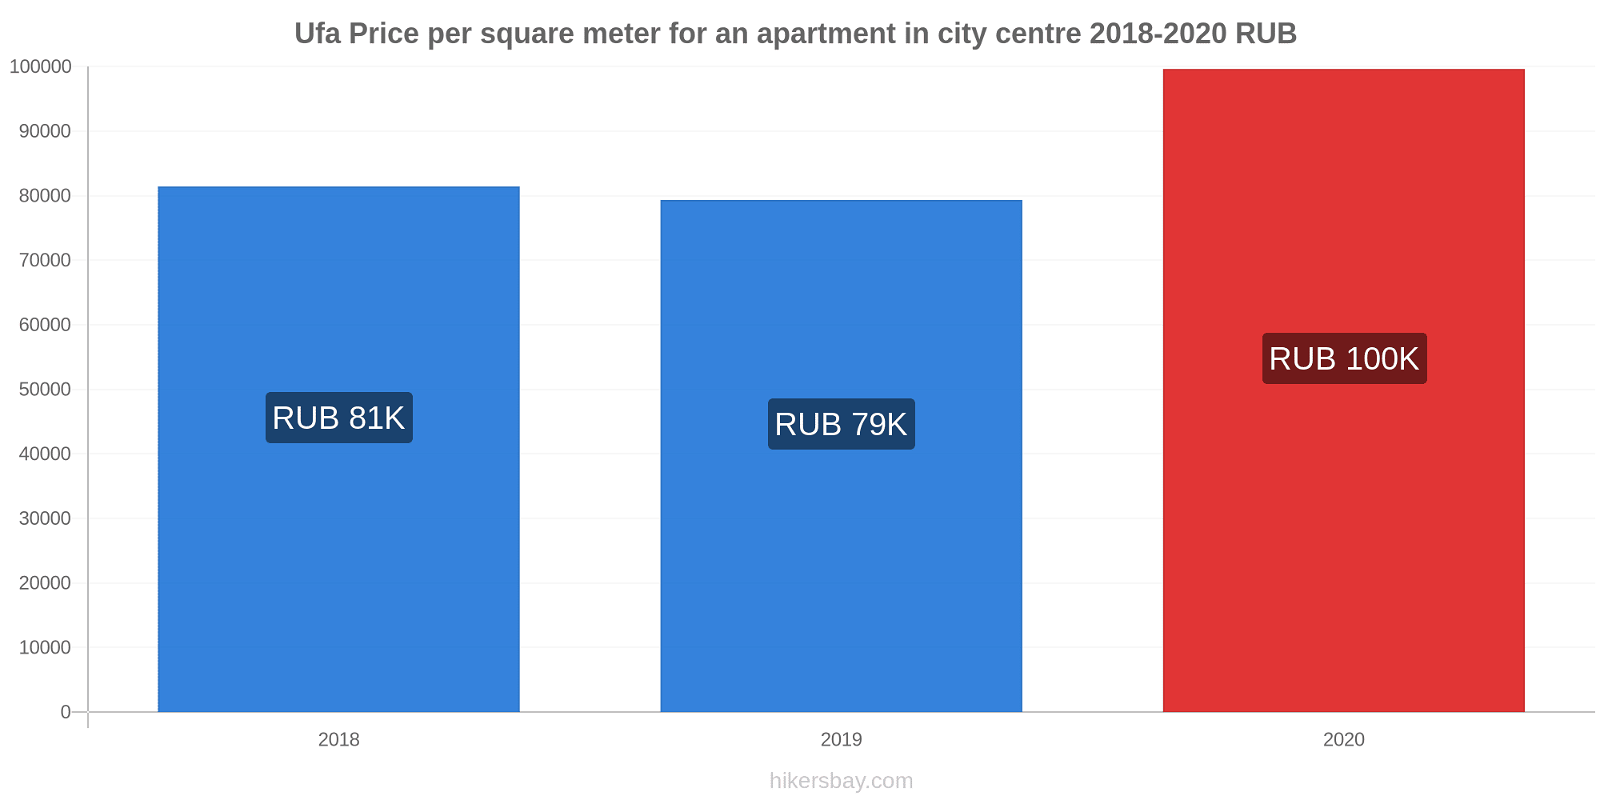 Ufa price changes Price per square meter for an apartment in city centre hikersbay.com